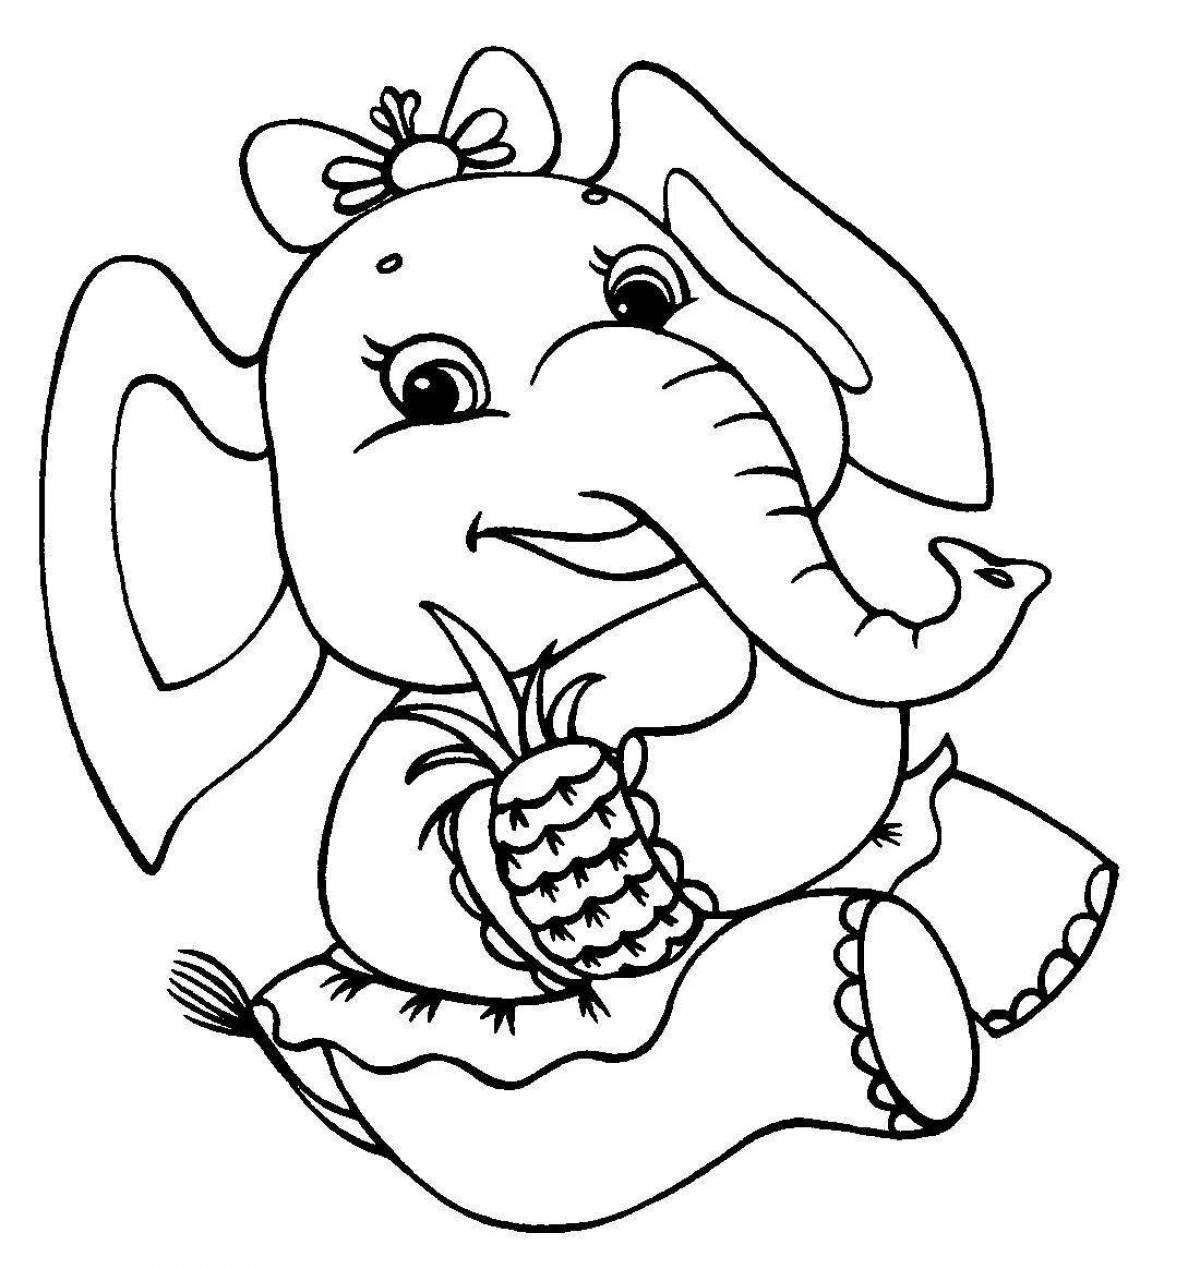 Fabulous elephant coloring for kids